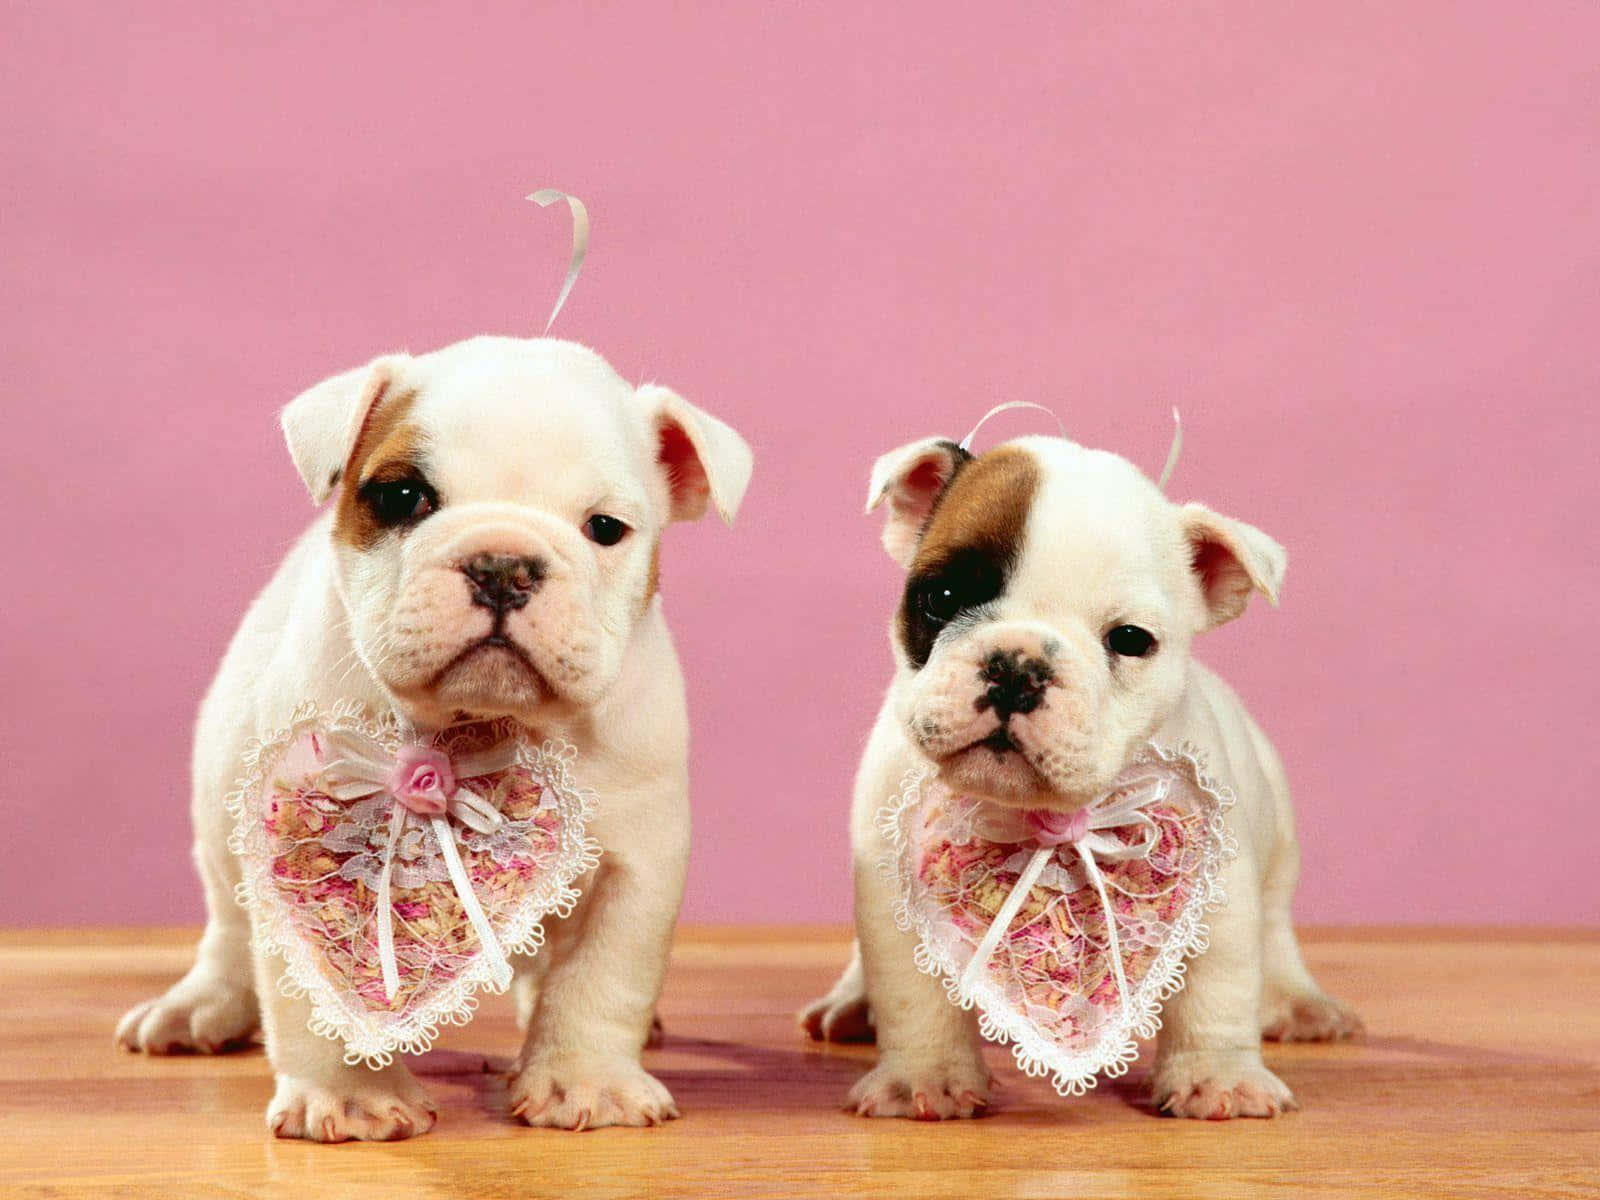 Two Puppies With Bows On Their Heads